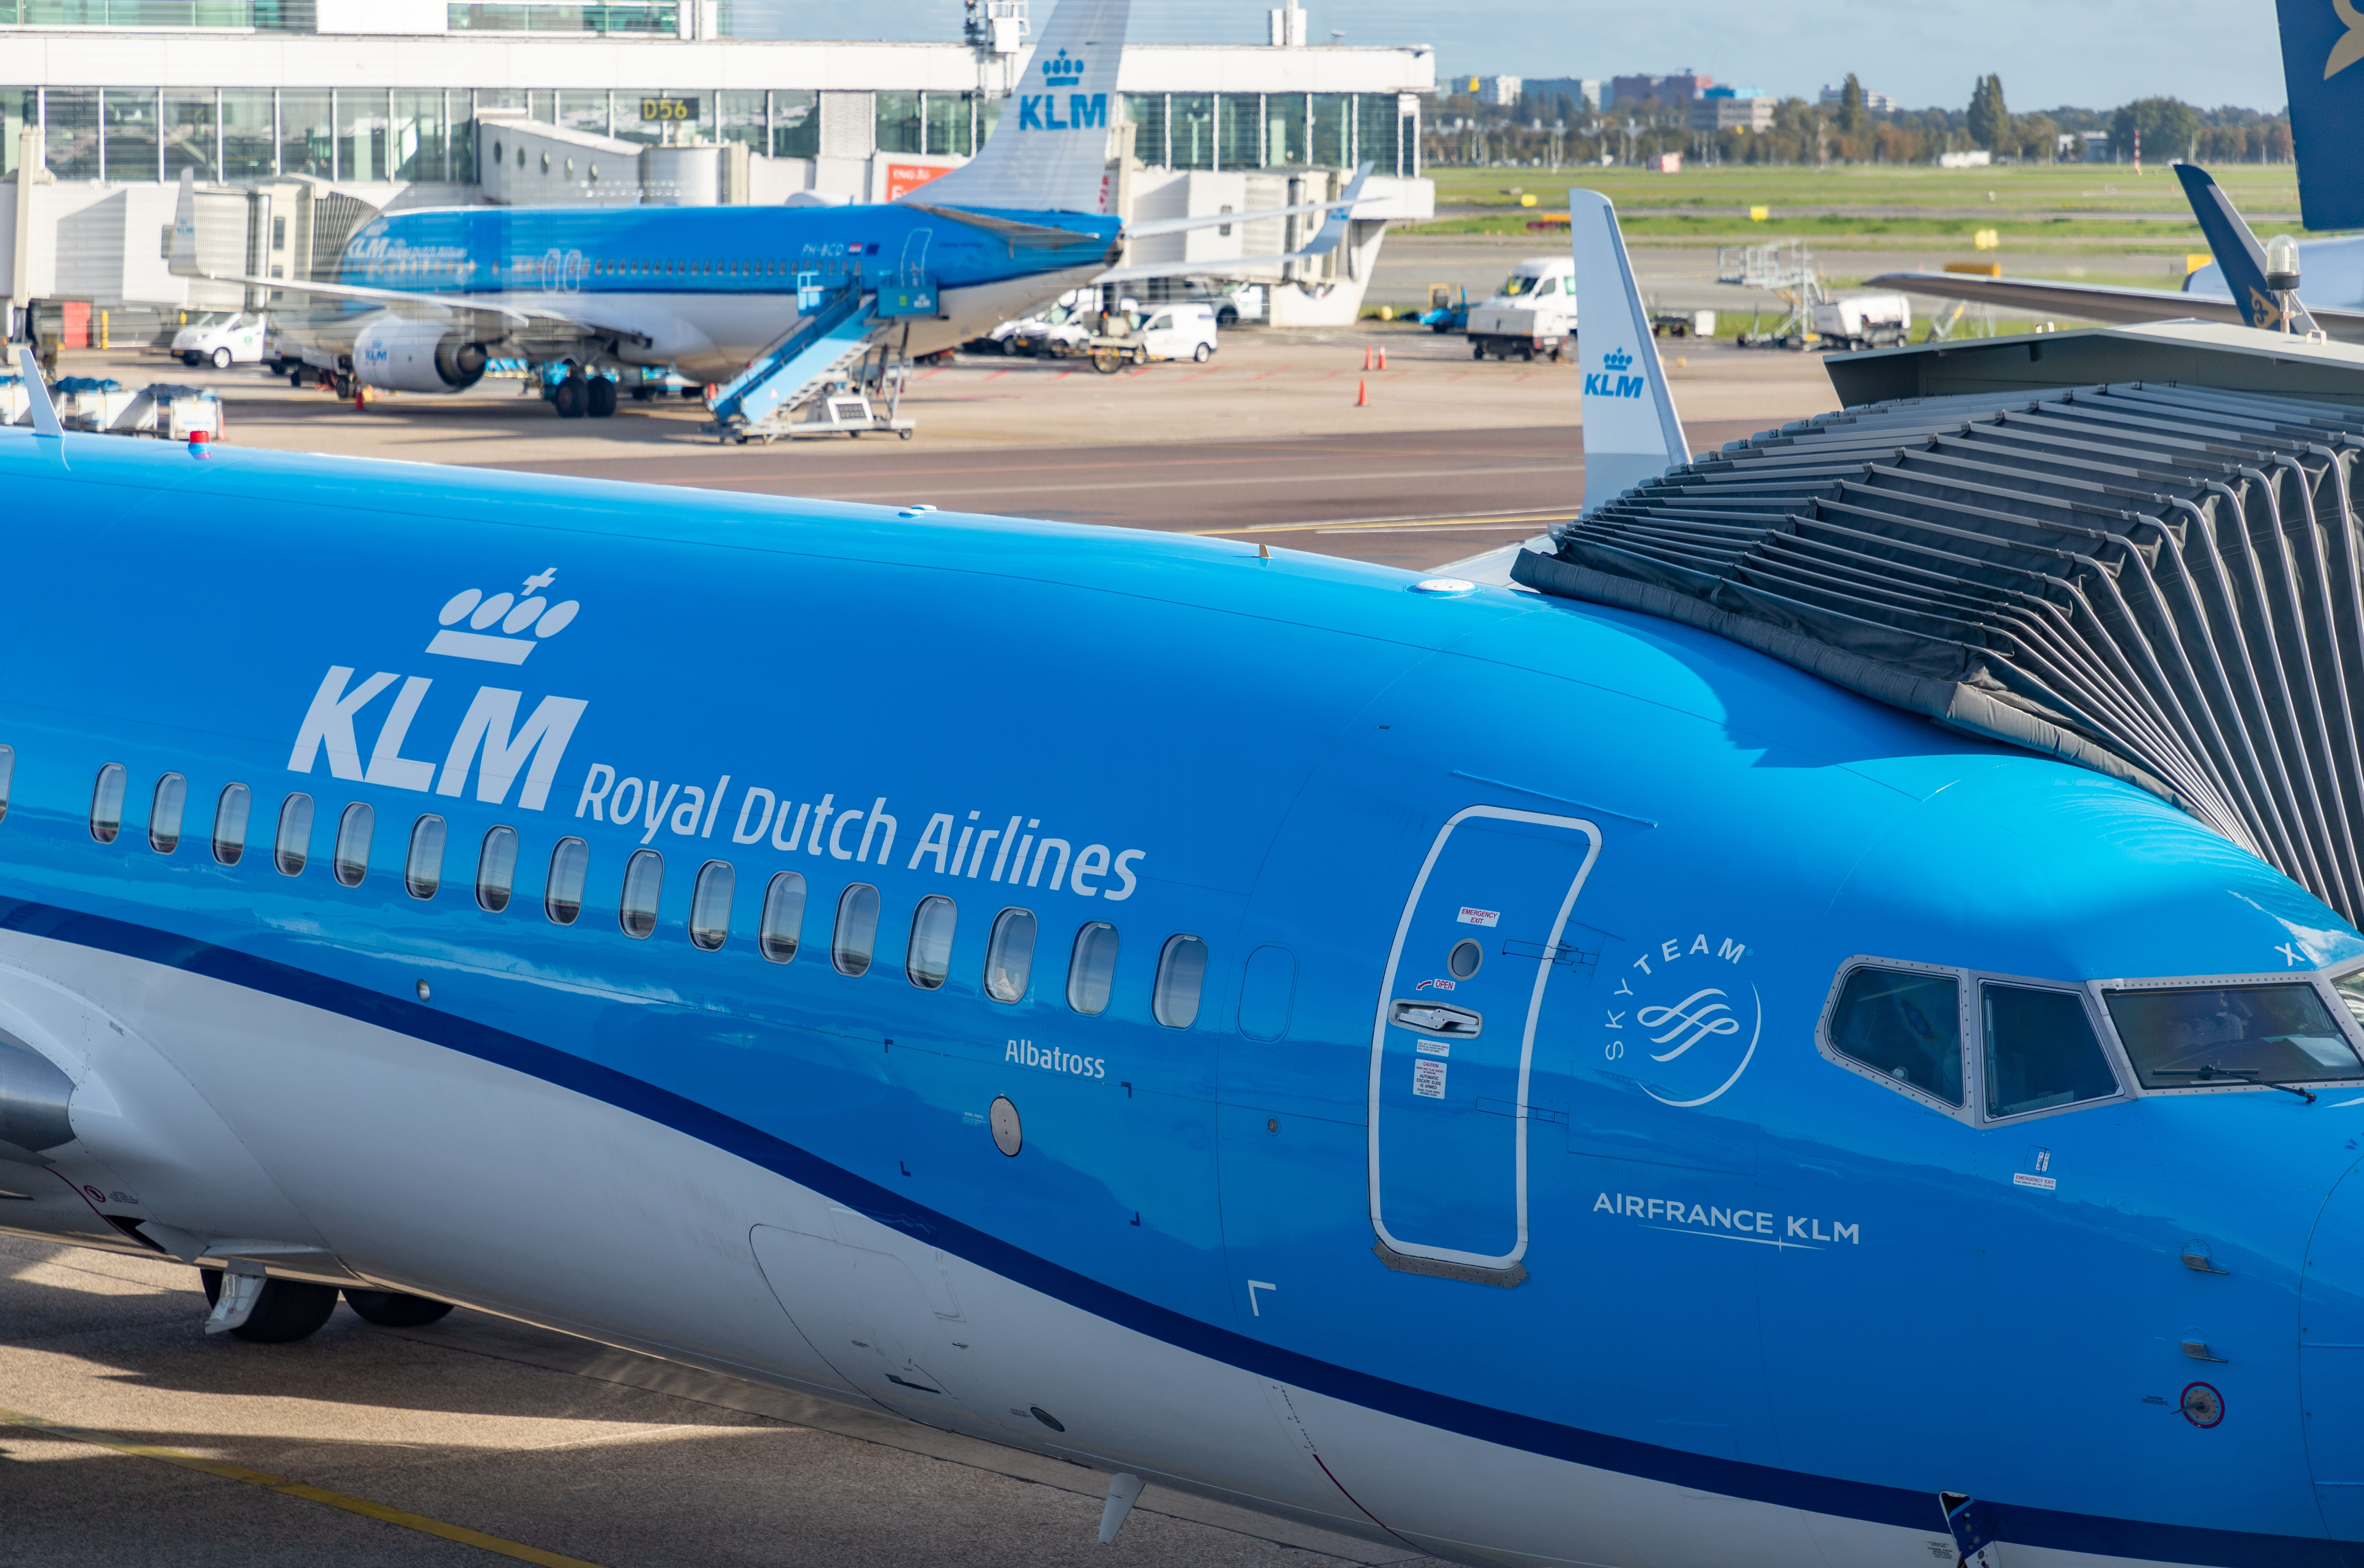 A KLM aircraft parked at a gate at Amsterdam Airport Schiphol.